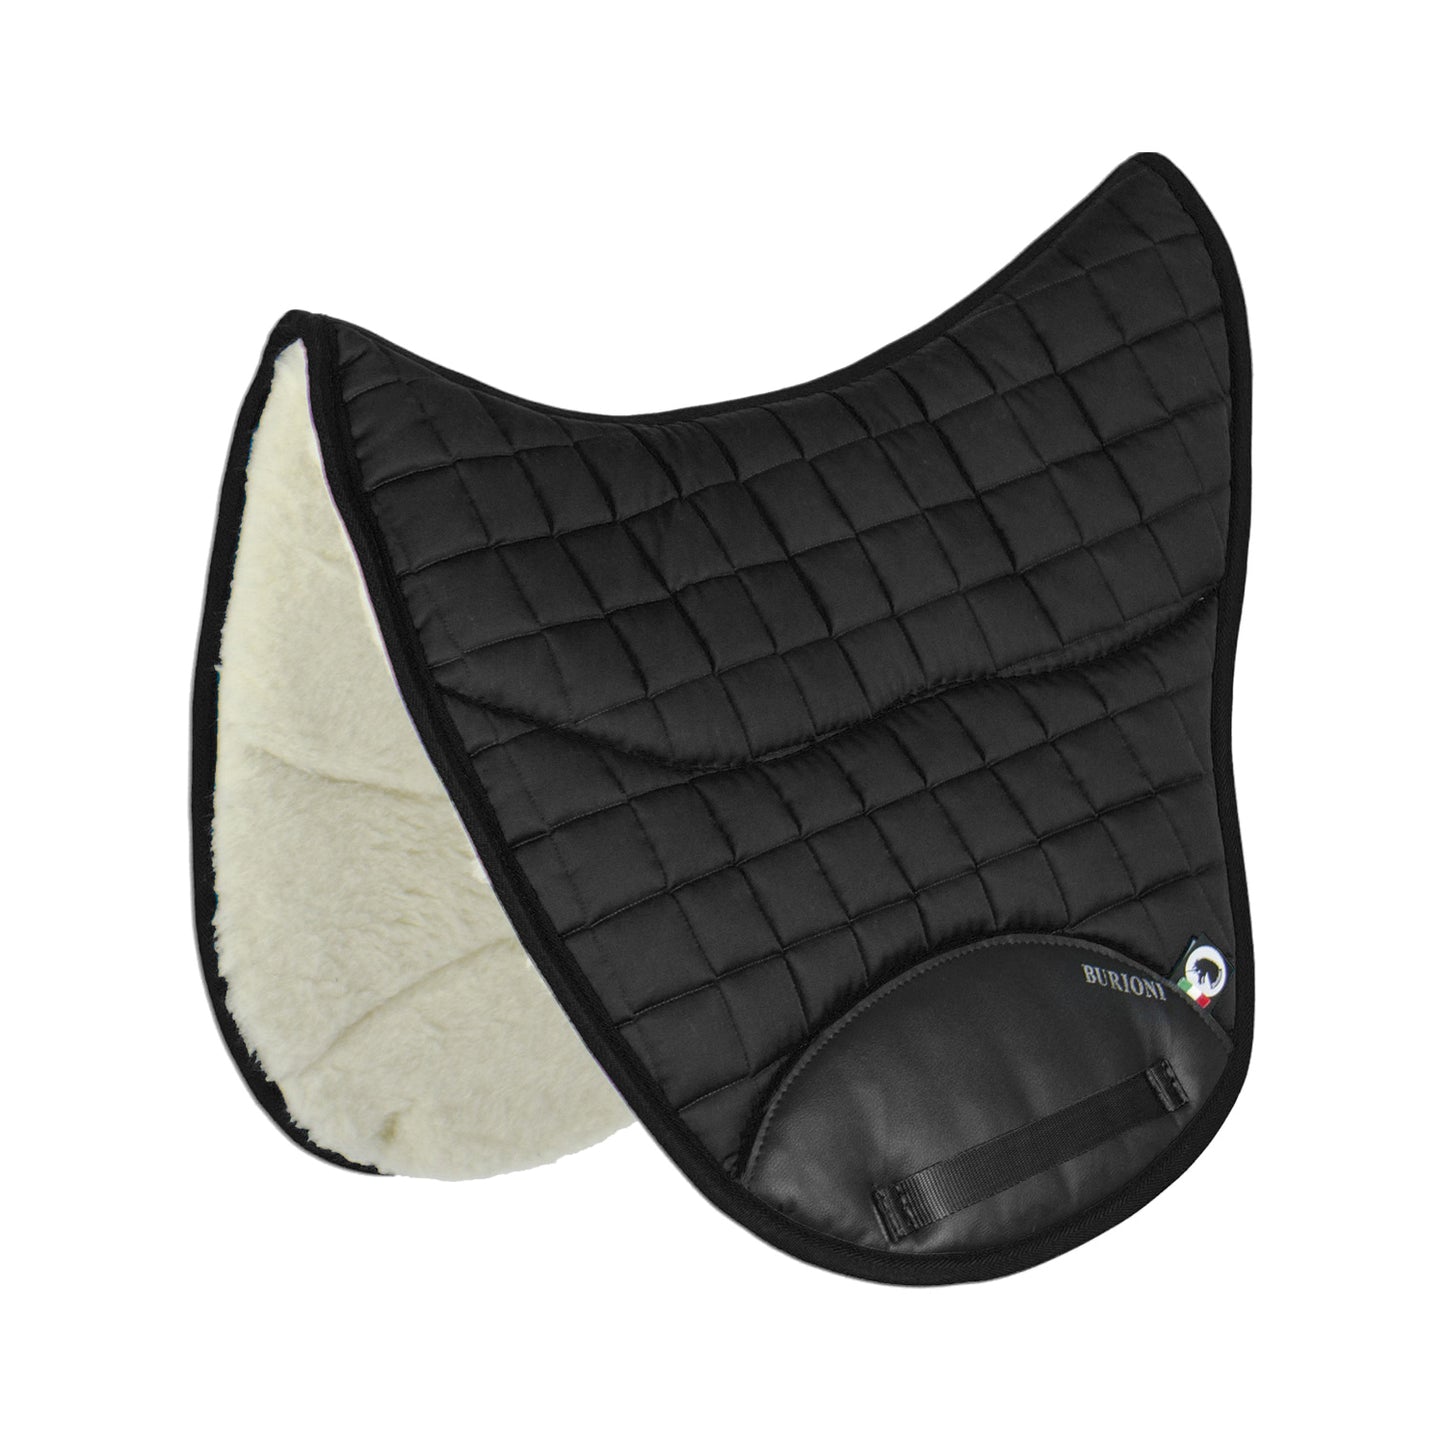 Endurance saddle pad in wool and cotton